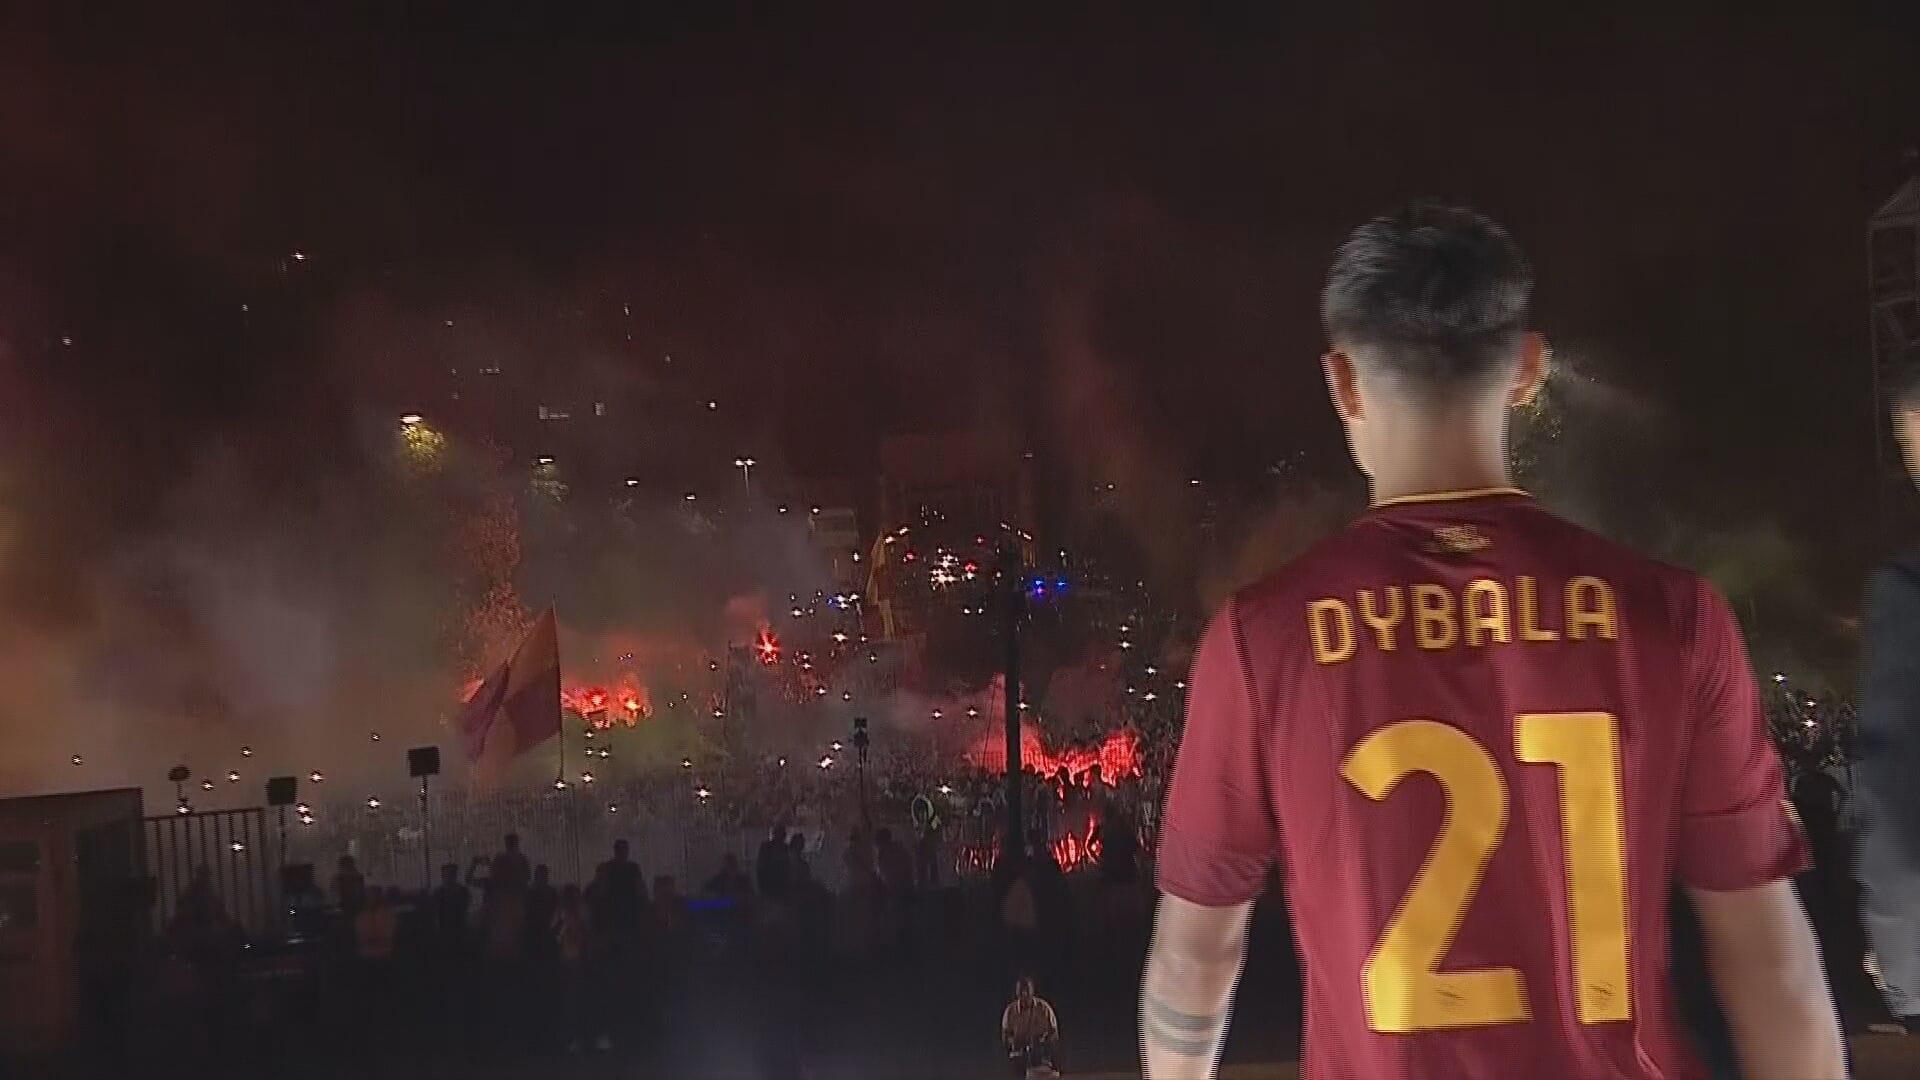 Italy: Roma welcomes star striker Paulo Dybala in spectacular style